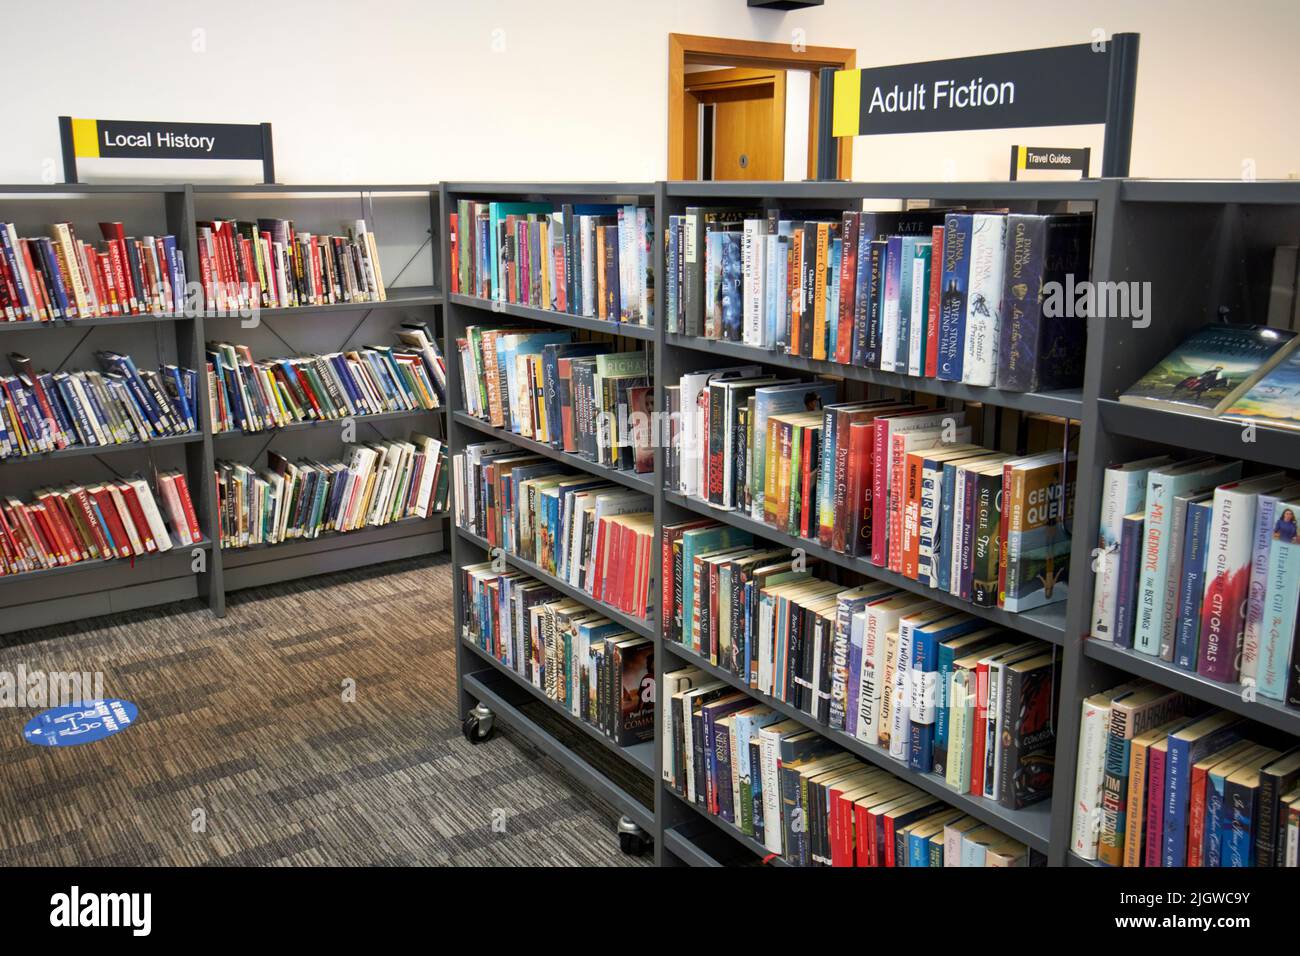 adult fiction and local history sections of Liverpool Central Library merseyside england uk Stock Photo